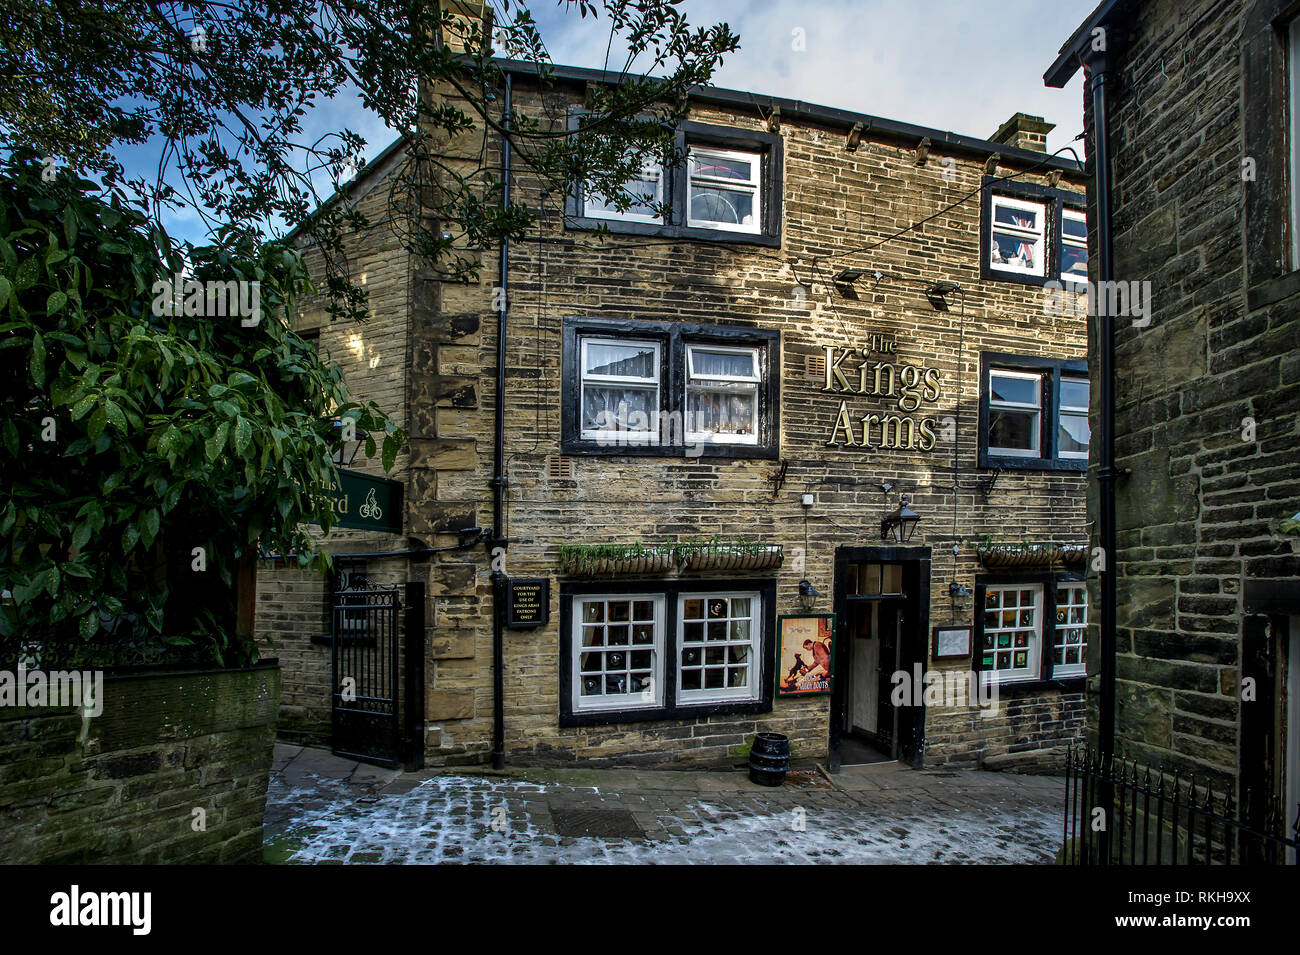 The village of Haworth in West Yorkshire, England, UK. The village was home to the famous Bront‘ sisters Ð Charlotte, Emily and Anne, who all wrote th Stock Photo